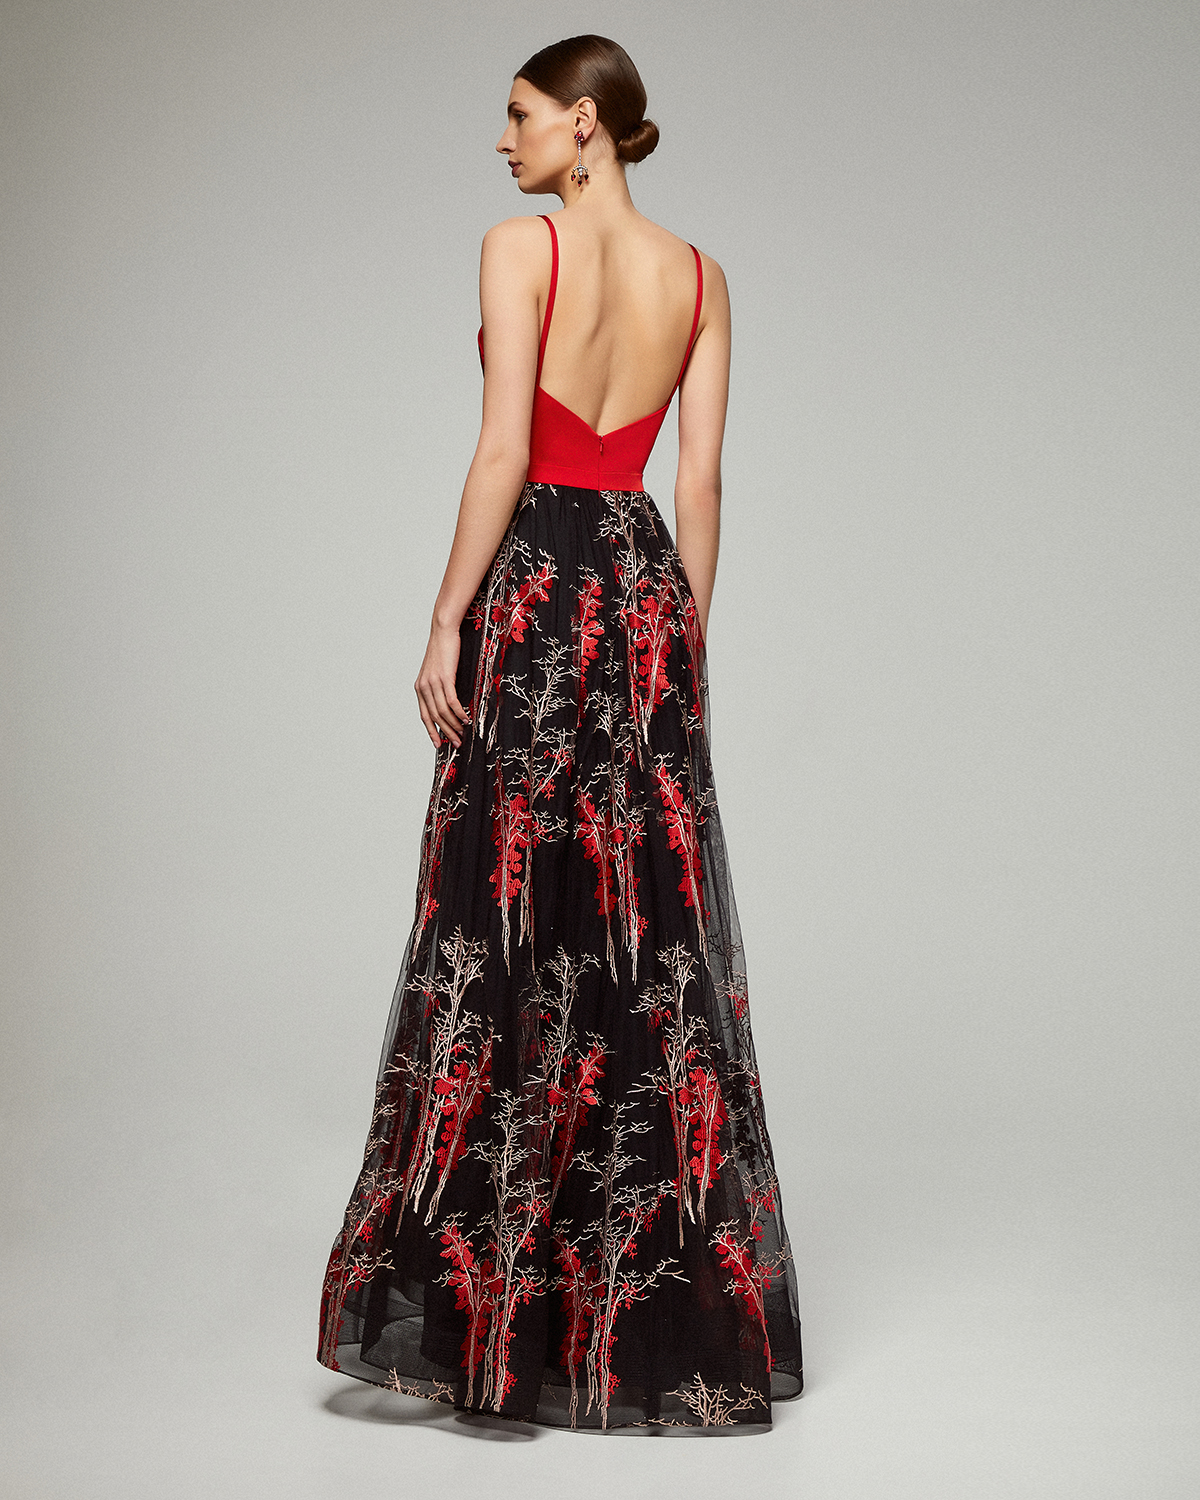 Long evening dress with printed skirt and solid top